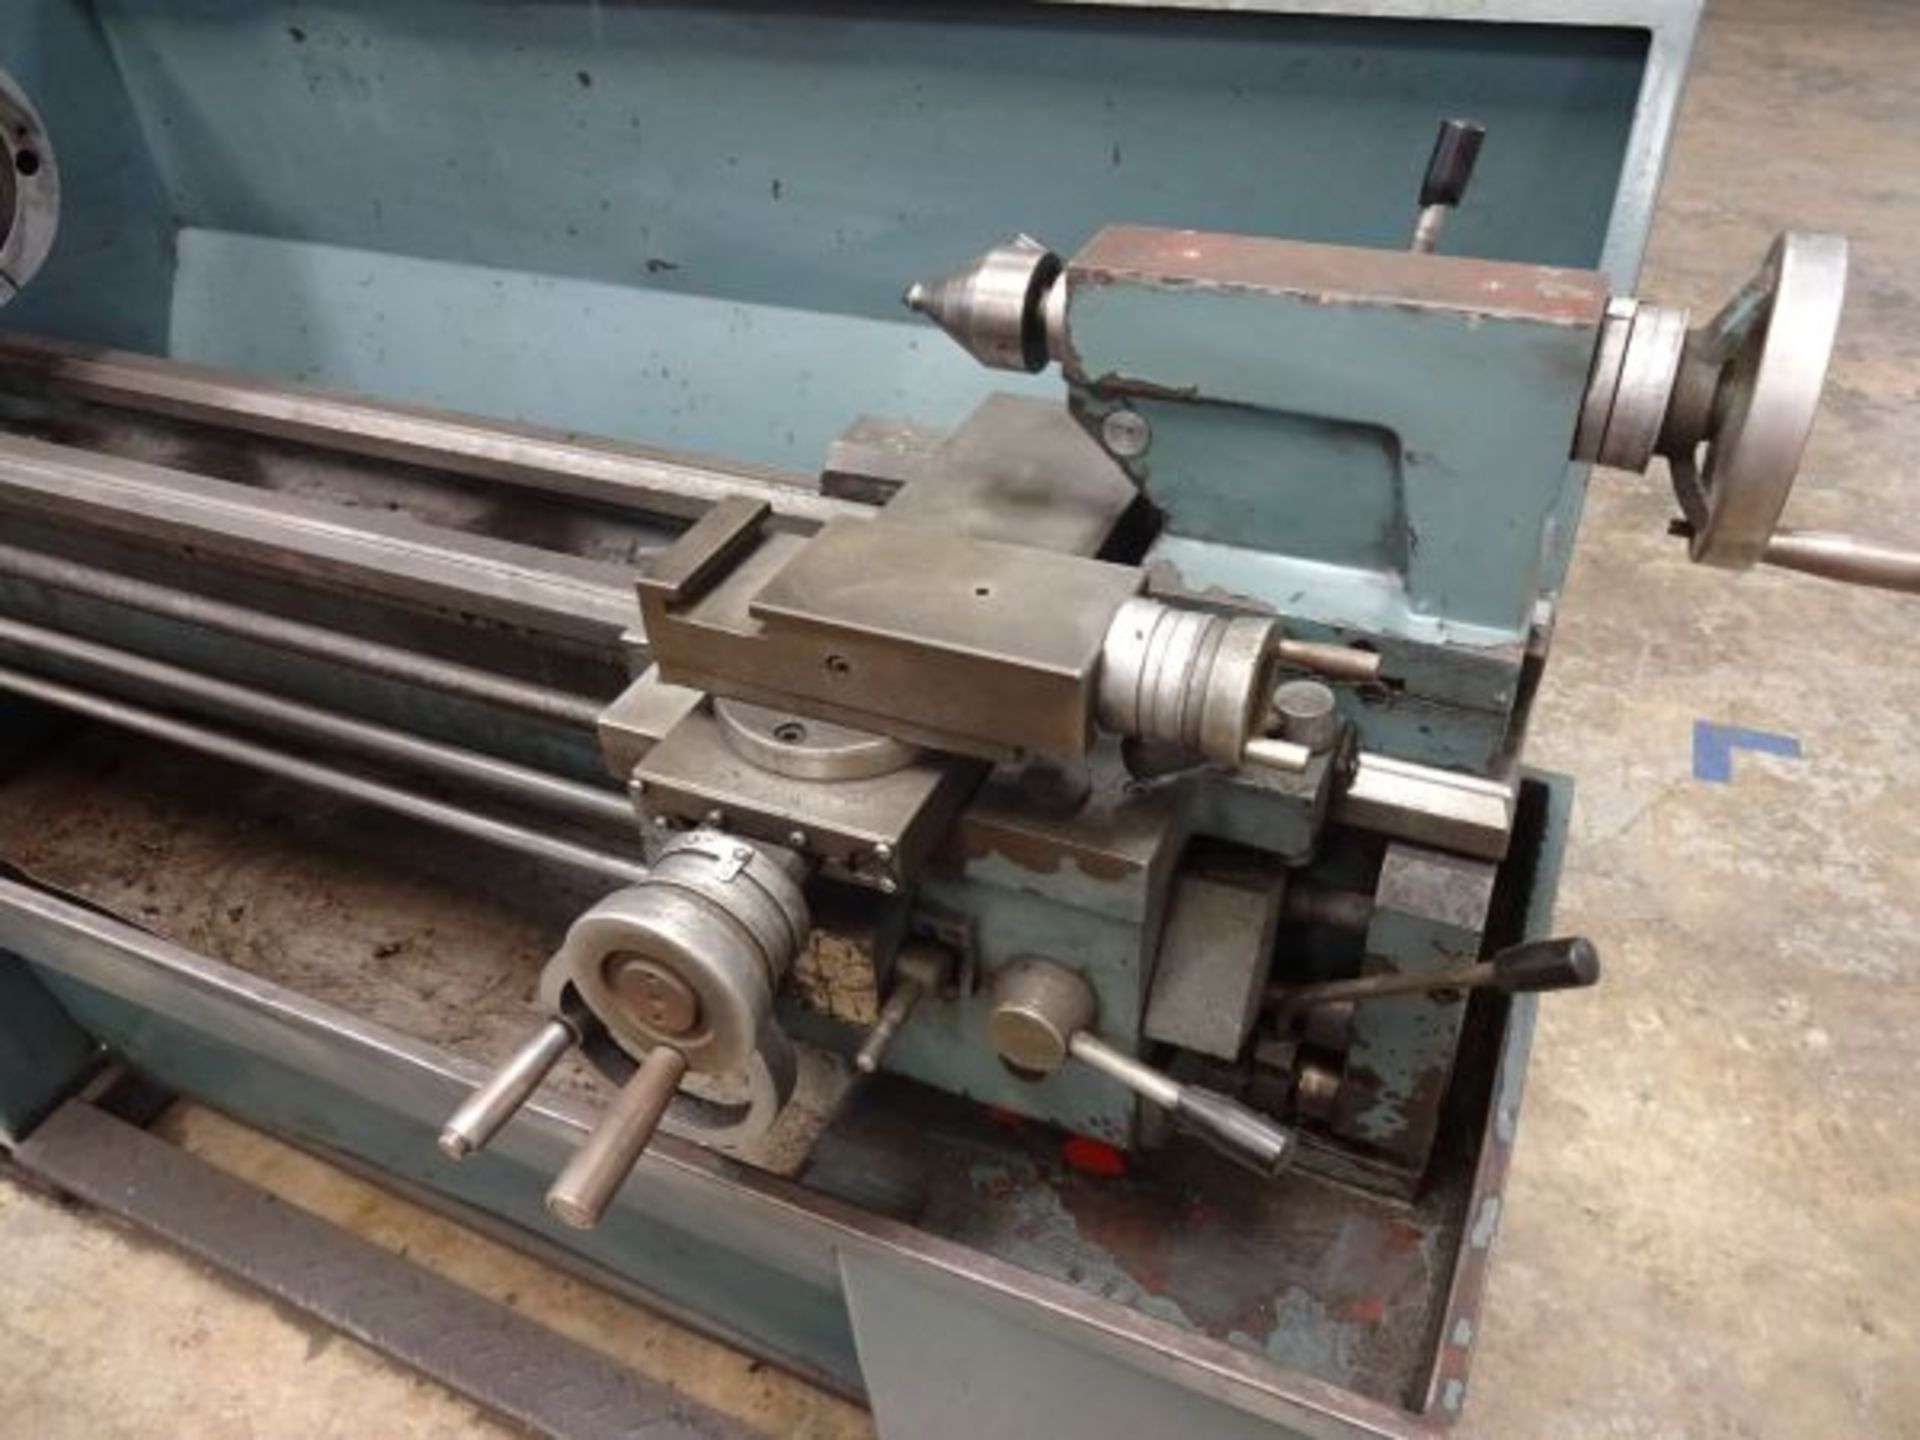 13" X 34" Enco Model 111-3320 Engine Lathe; S/N 940038, 8" 3-Jaw Chuck, 1" Spindle Bore, 45-1,800 - Image 7 of 10